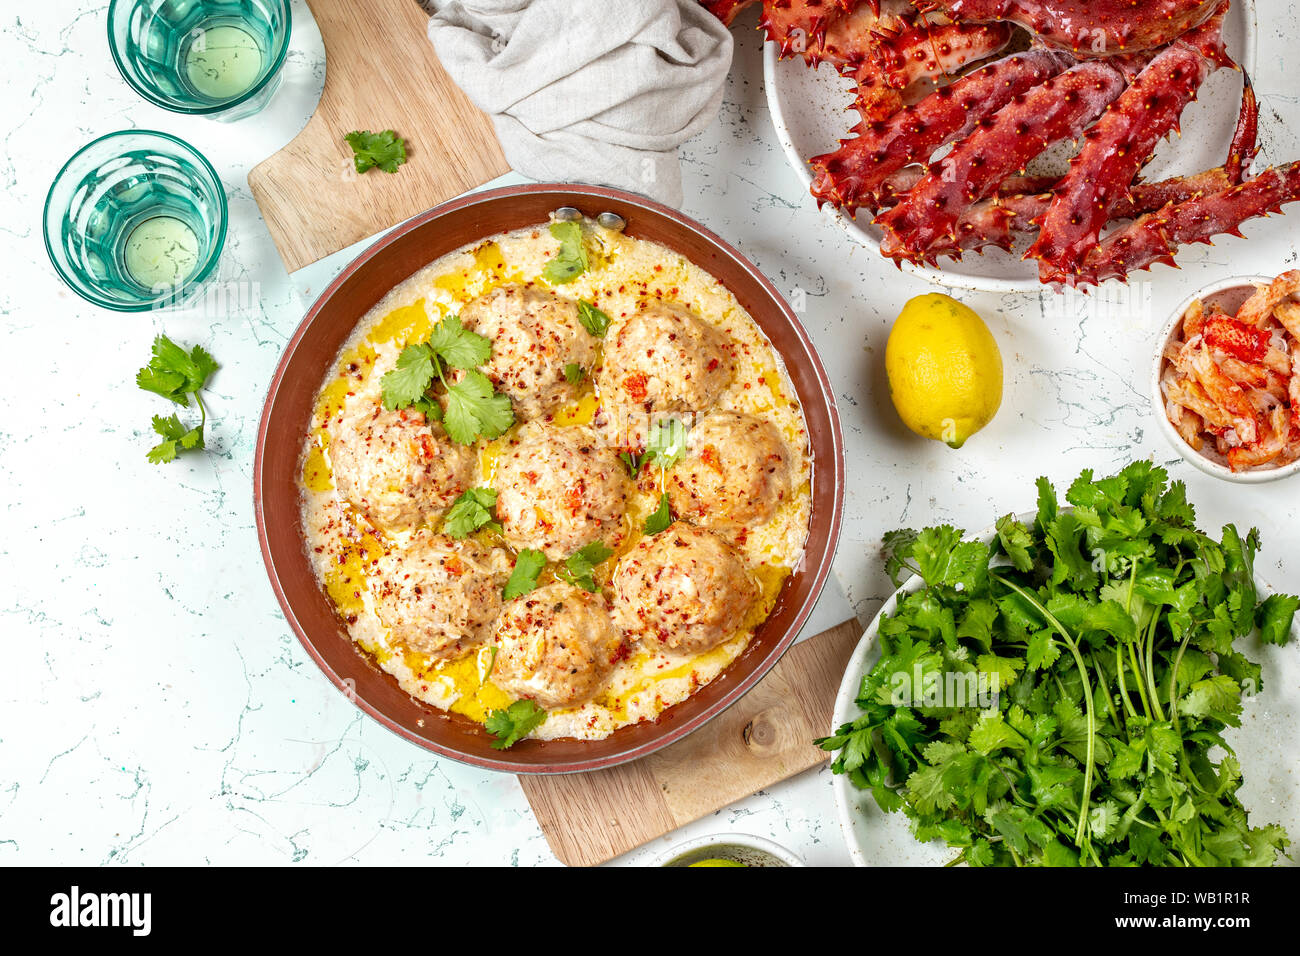 CRABMEATBALLS crab meatballs in white creamy sauce in red pan, whole king crab, cilantro, lemon and white wine on white background Stock Photo